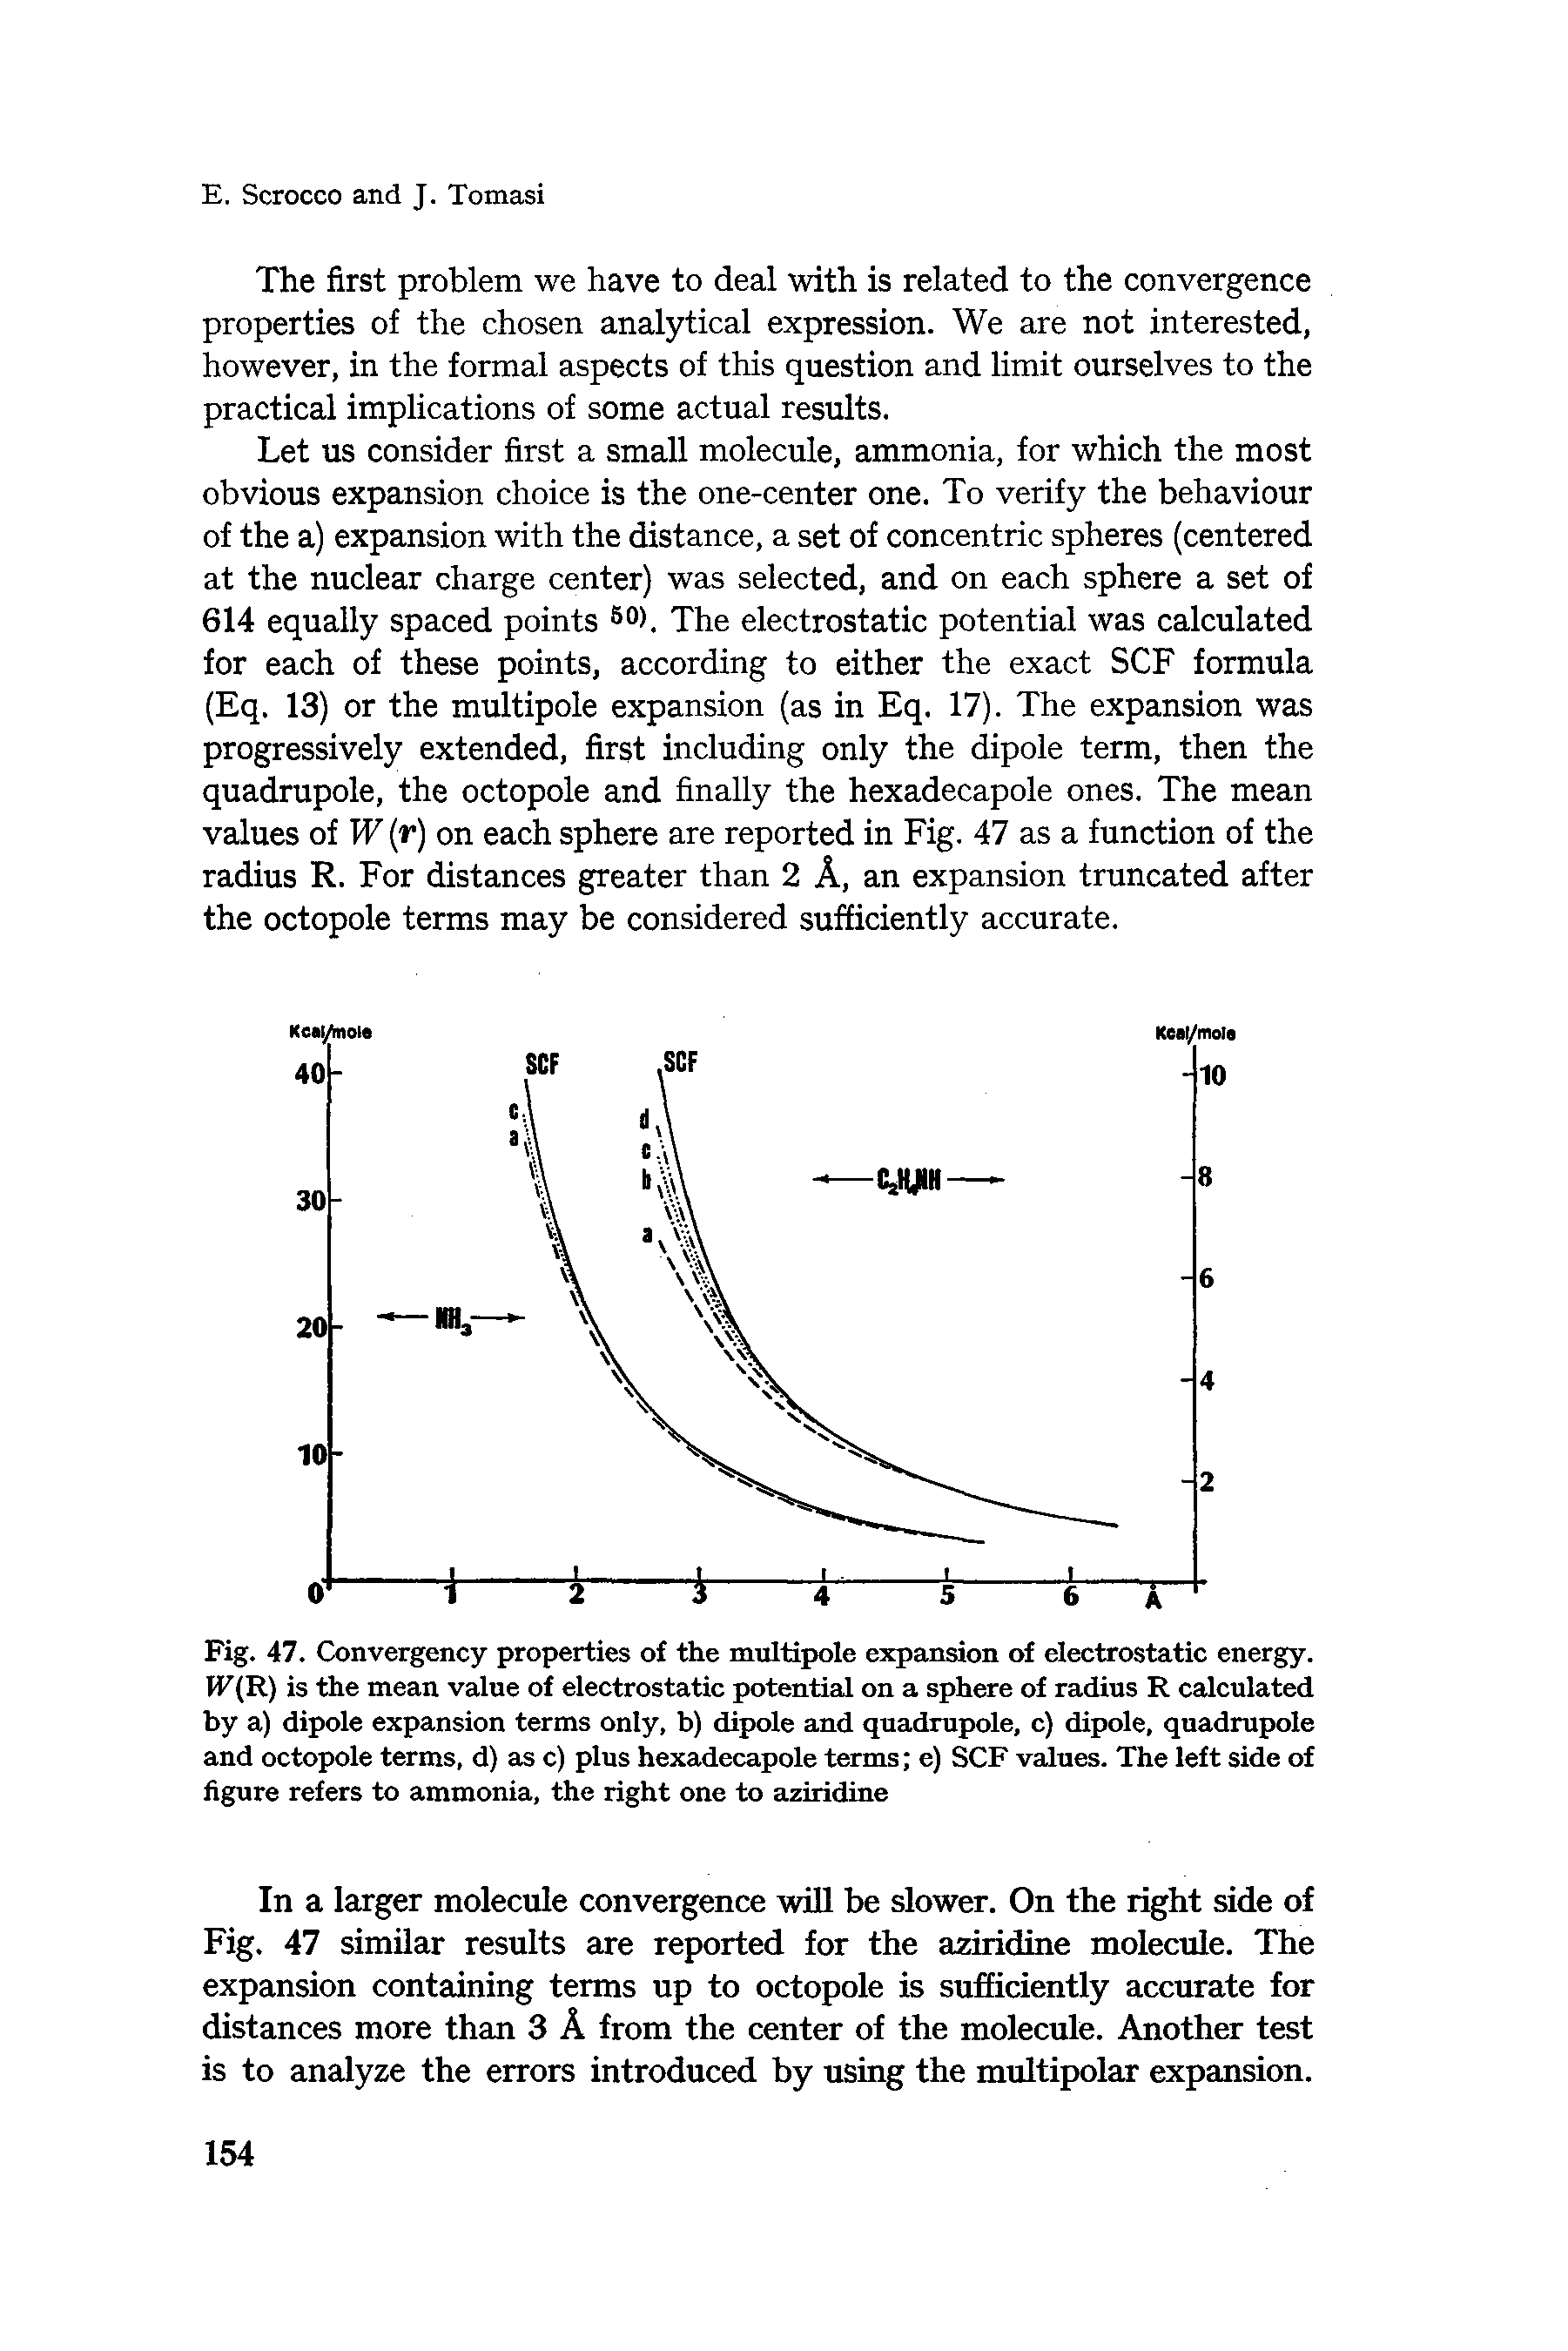 Fig. 47. Convergency properties of the multipole expansion of electrostatic energy. 1F(R) is the mean value of electrostatic potential on a sphere of radius R calculated by a) dipole expansion terms only, b) dipole and quadrupole, c) dipole, quadrupole and octopole terms, d) as c) plus hexadecapole terms e) SCF values. The left side of figure refers to ammonia, the right one to aziridine...